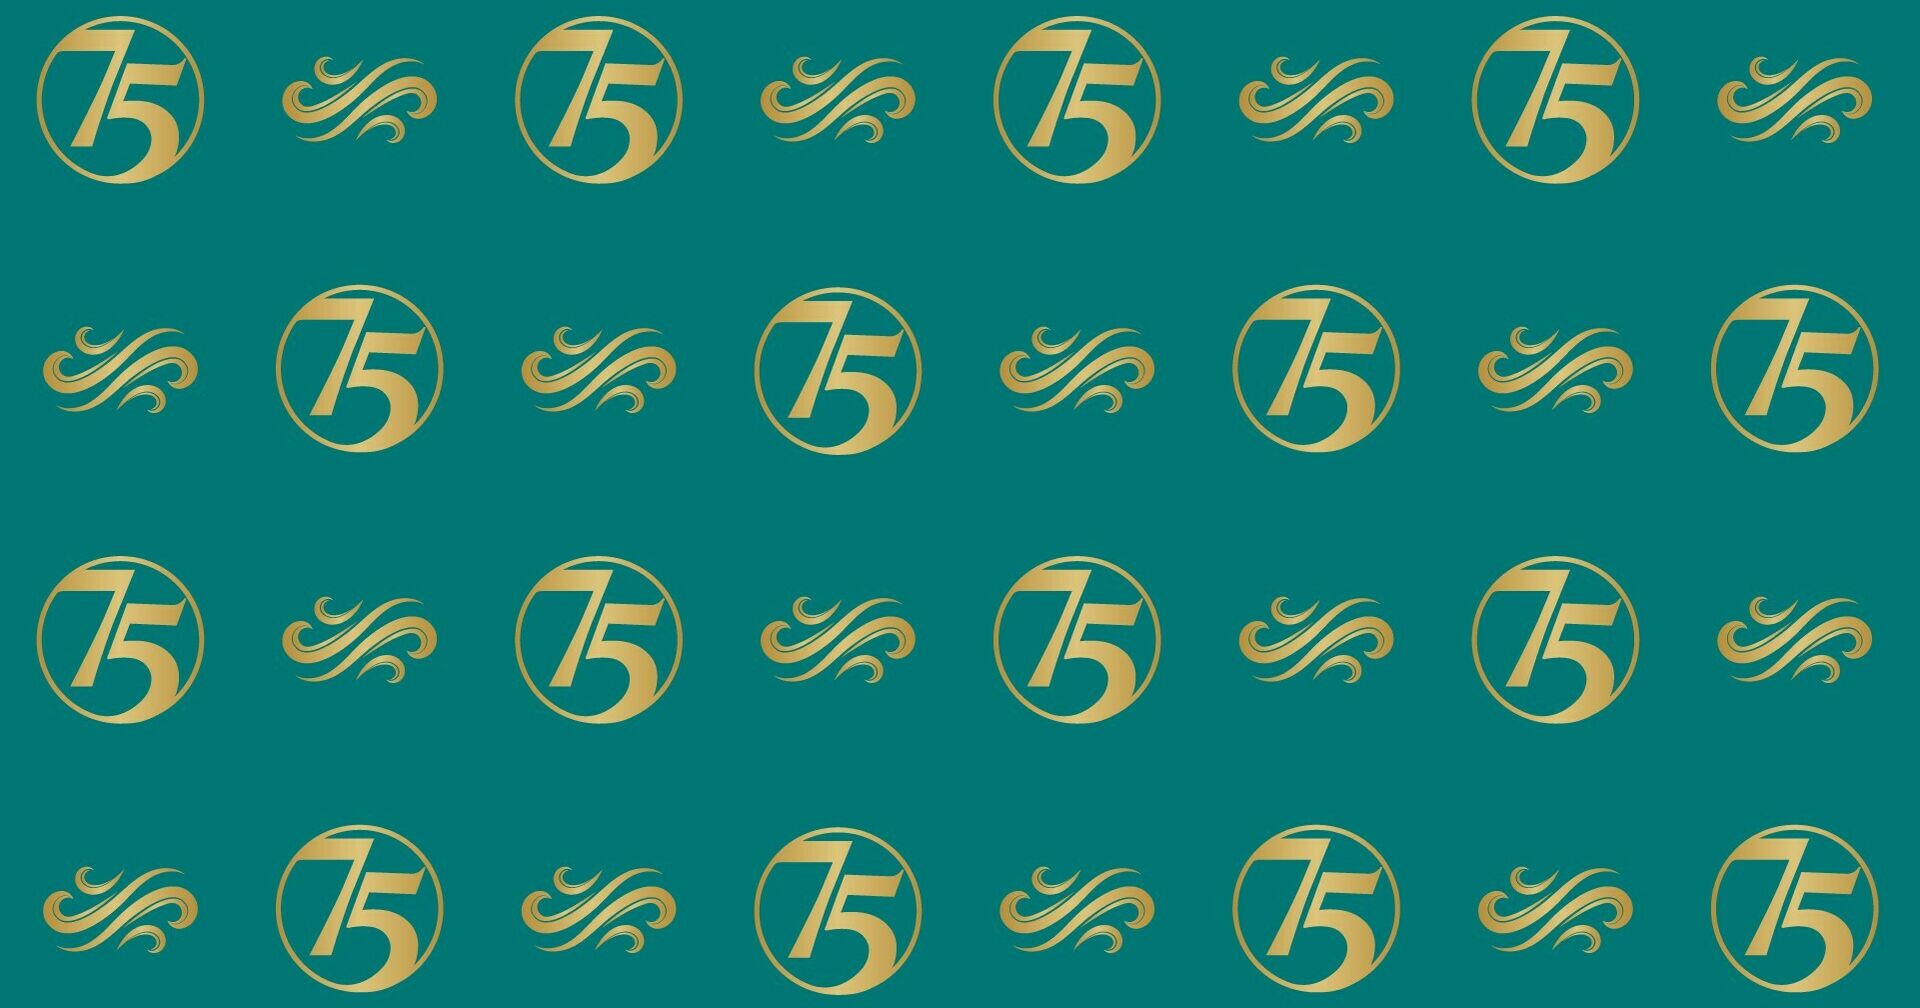 Teal background with gold 75 logo and winds of change logo